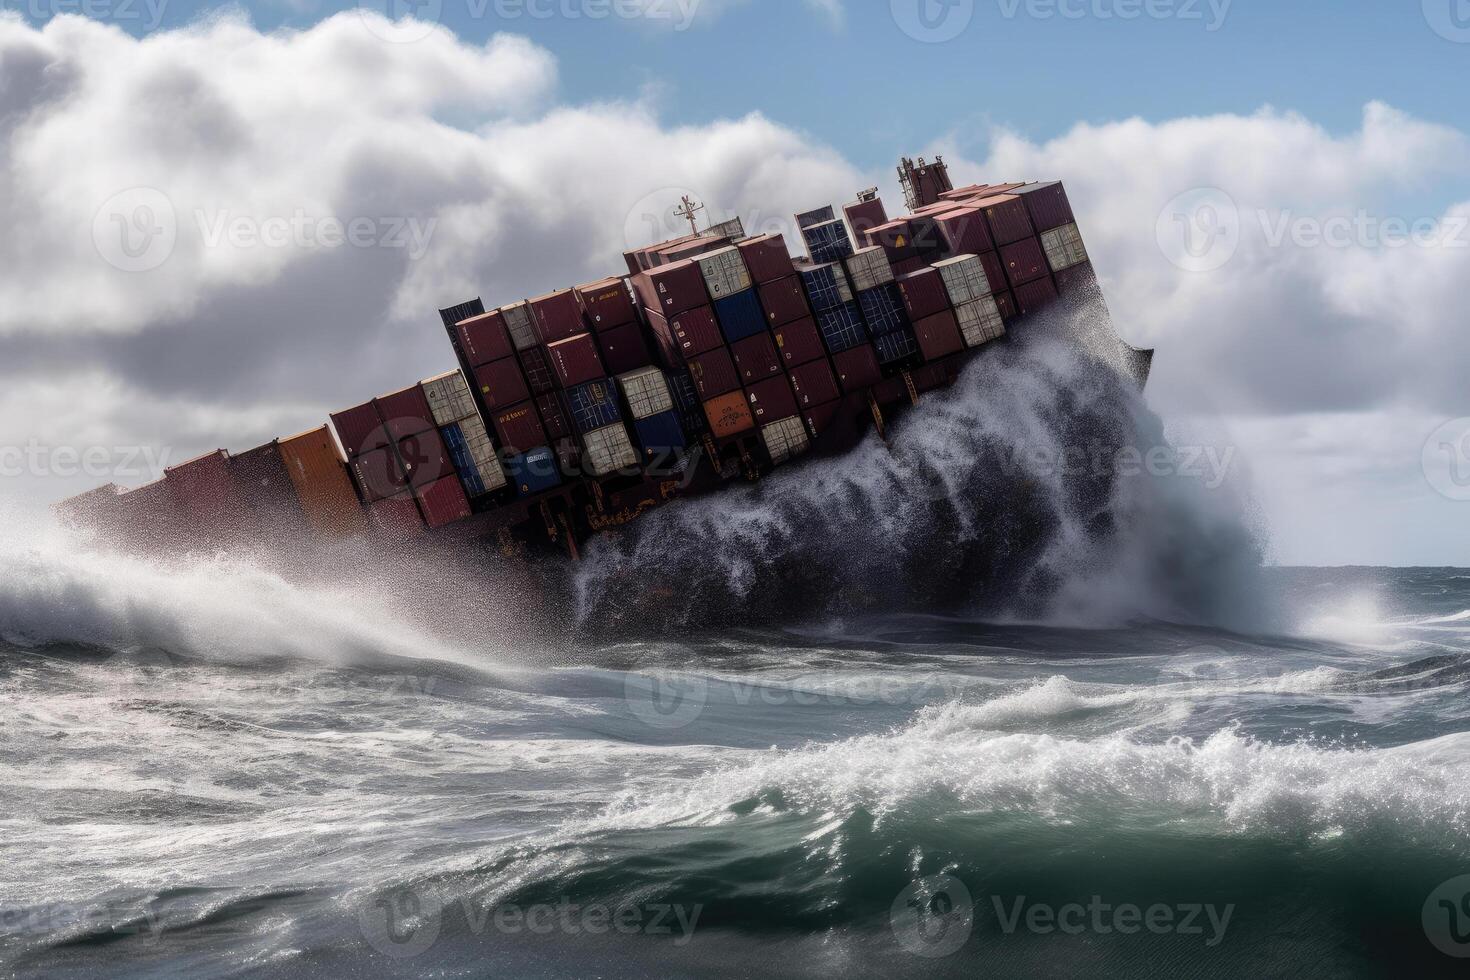 Wrecked cargo ship with conatiners in stormy sea with large waves. photo